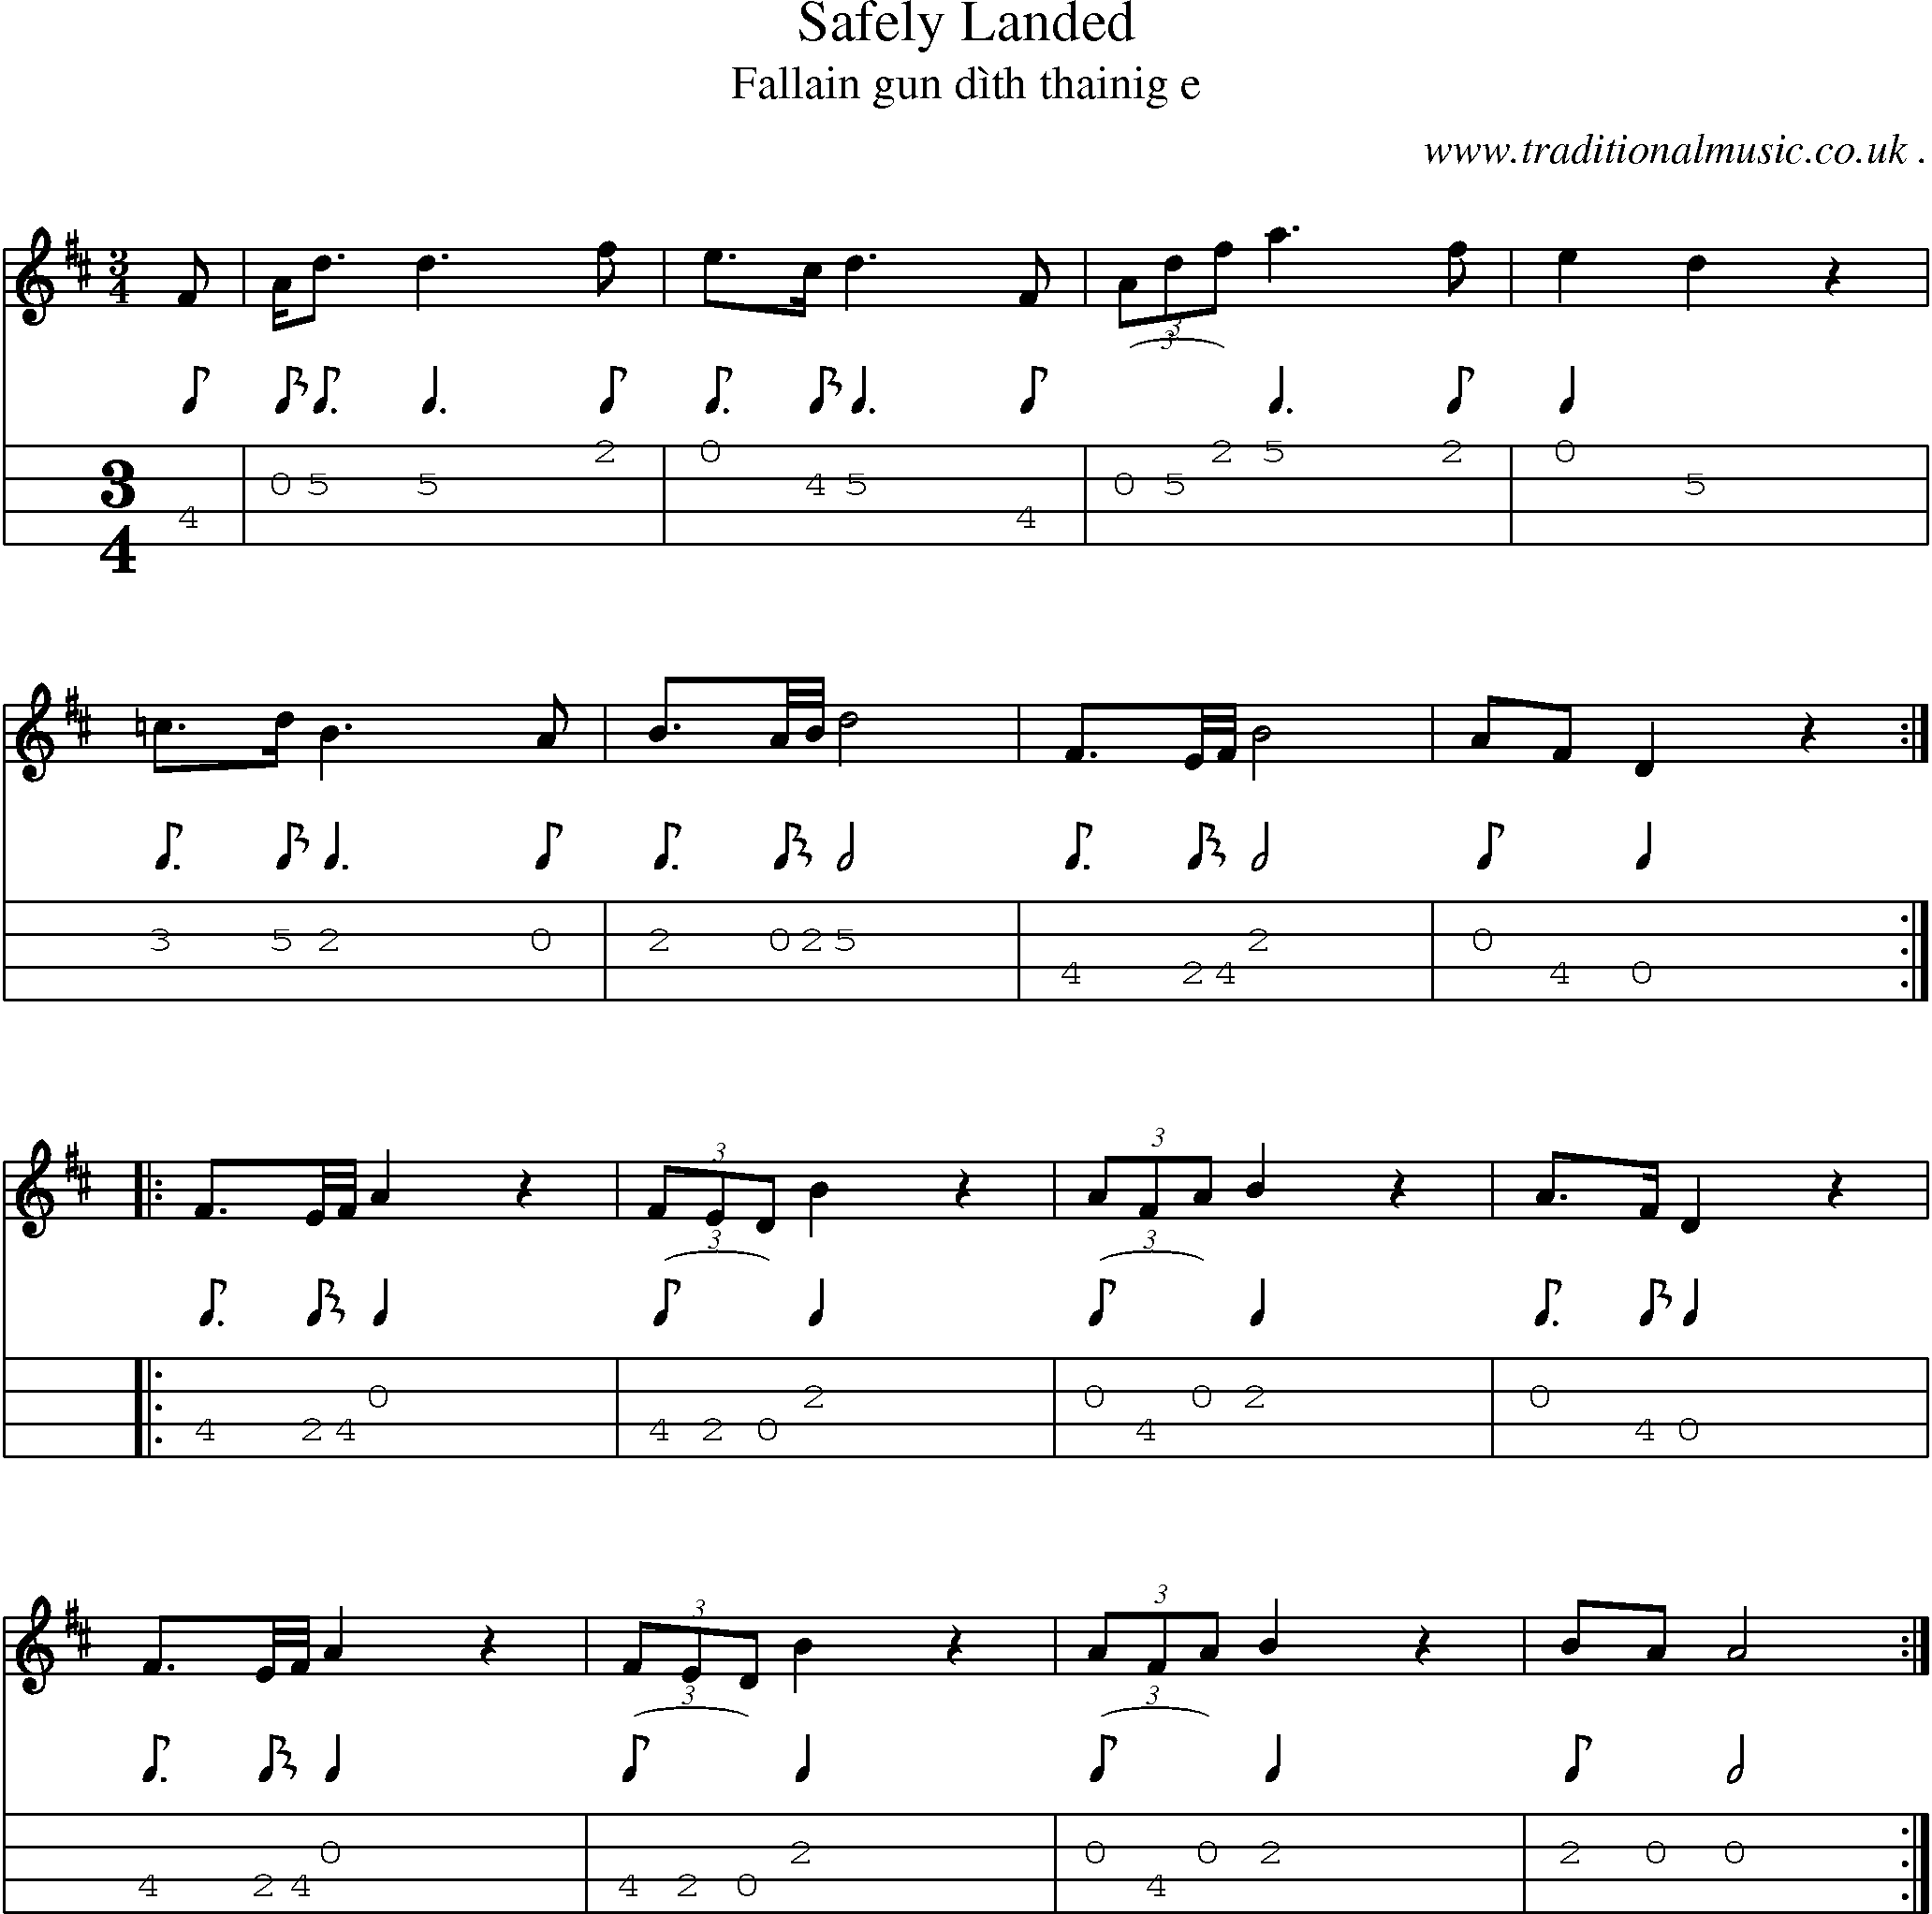 Sheet-music  score, Chords and Mandolin Tabs for Safely Landed